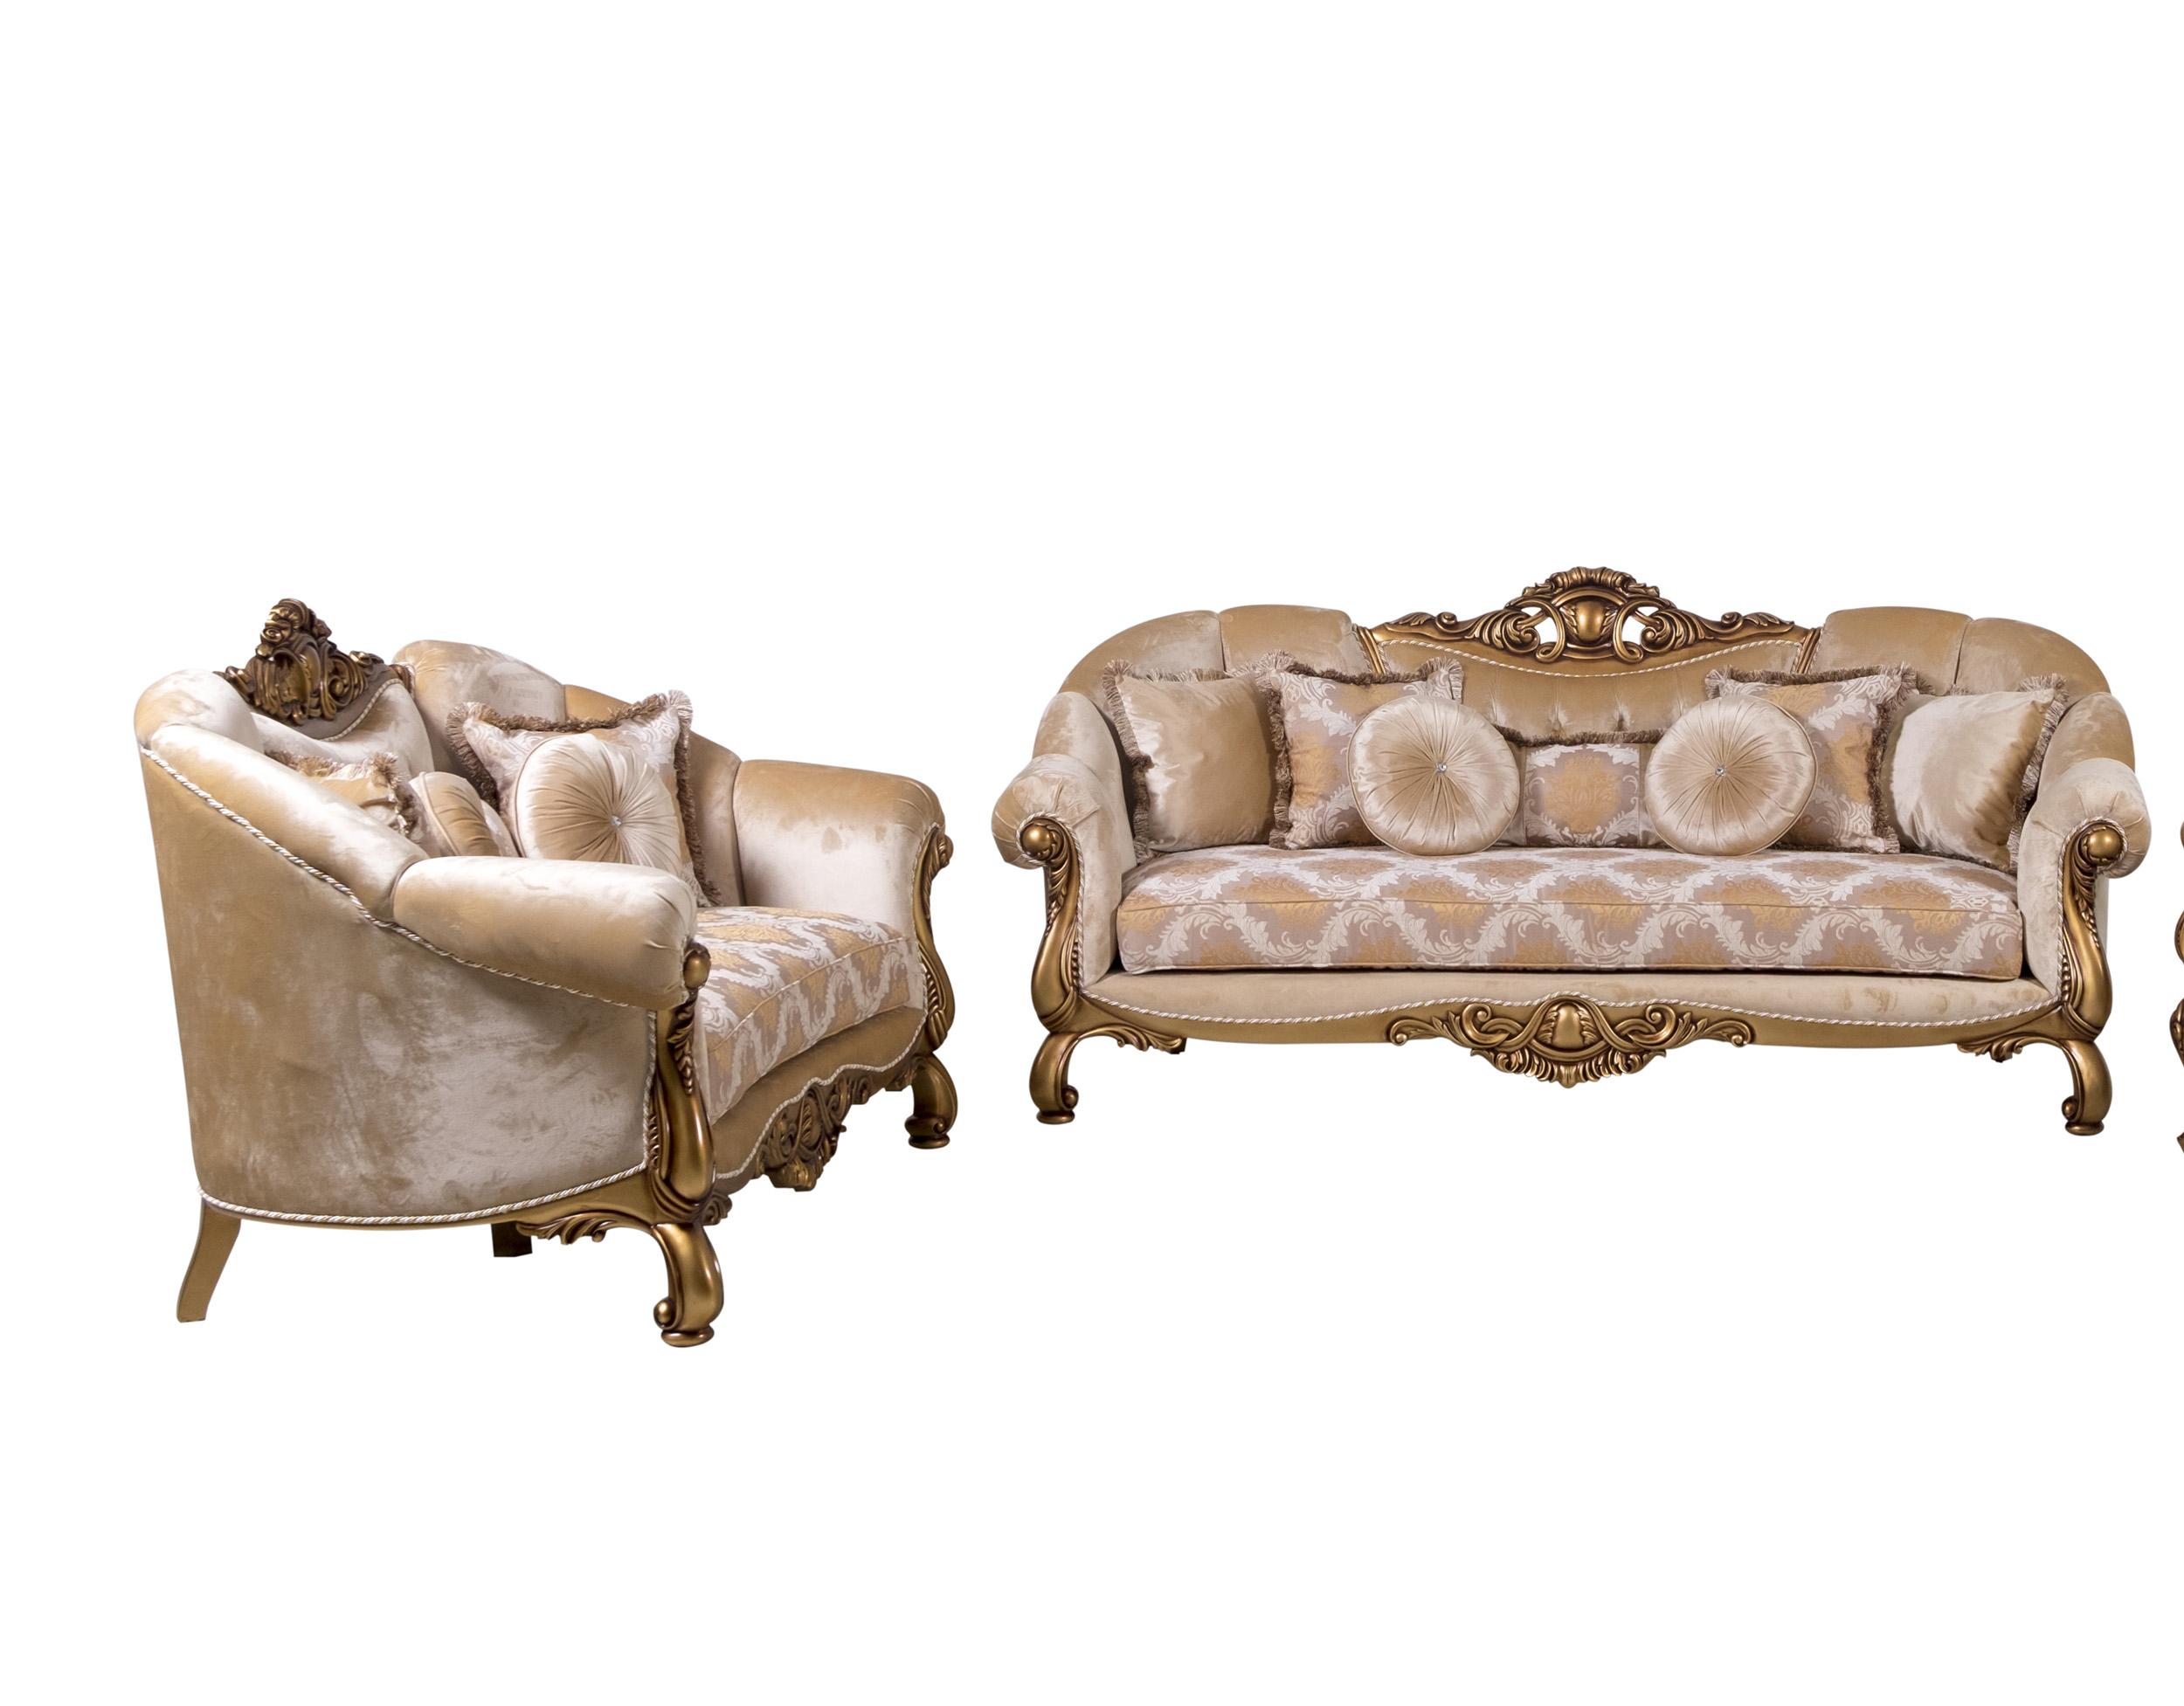 Classic, Traditional Sofa Set GOLDEN KNIGHTS 4590-Set-2 in Gold, Bronze, Beige Fabric